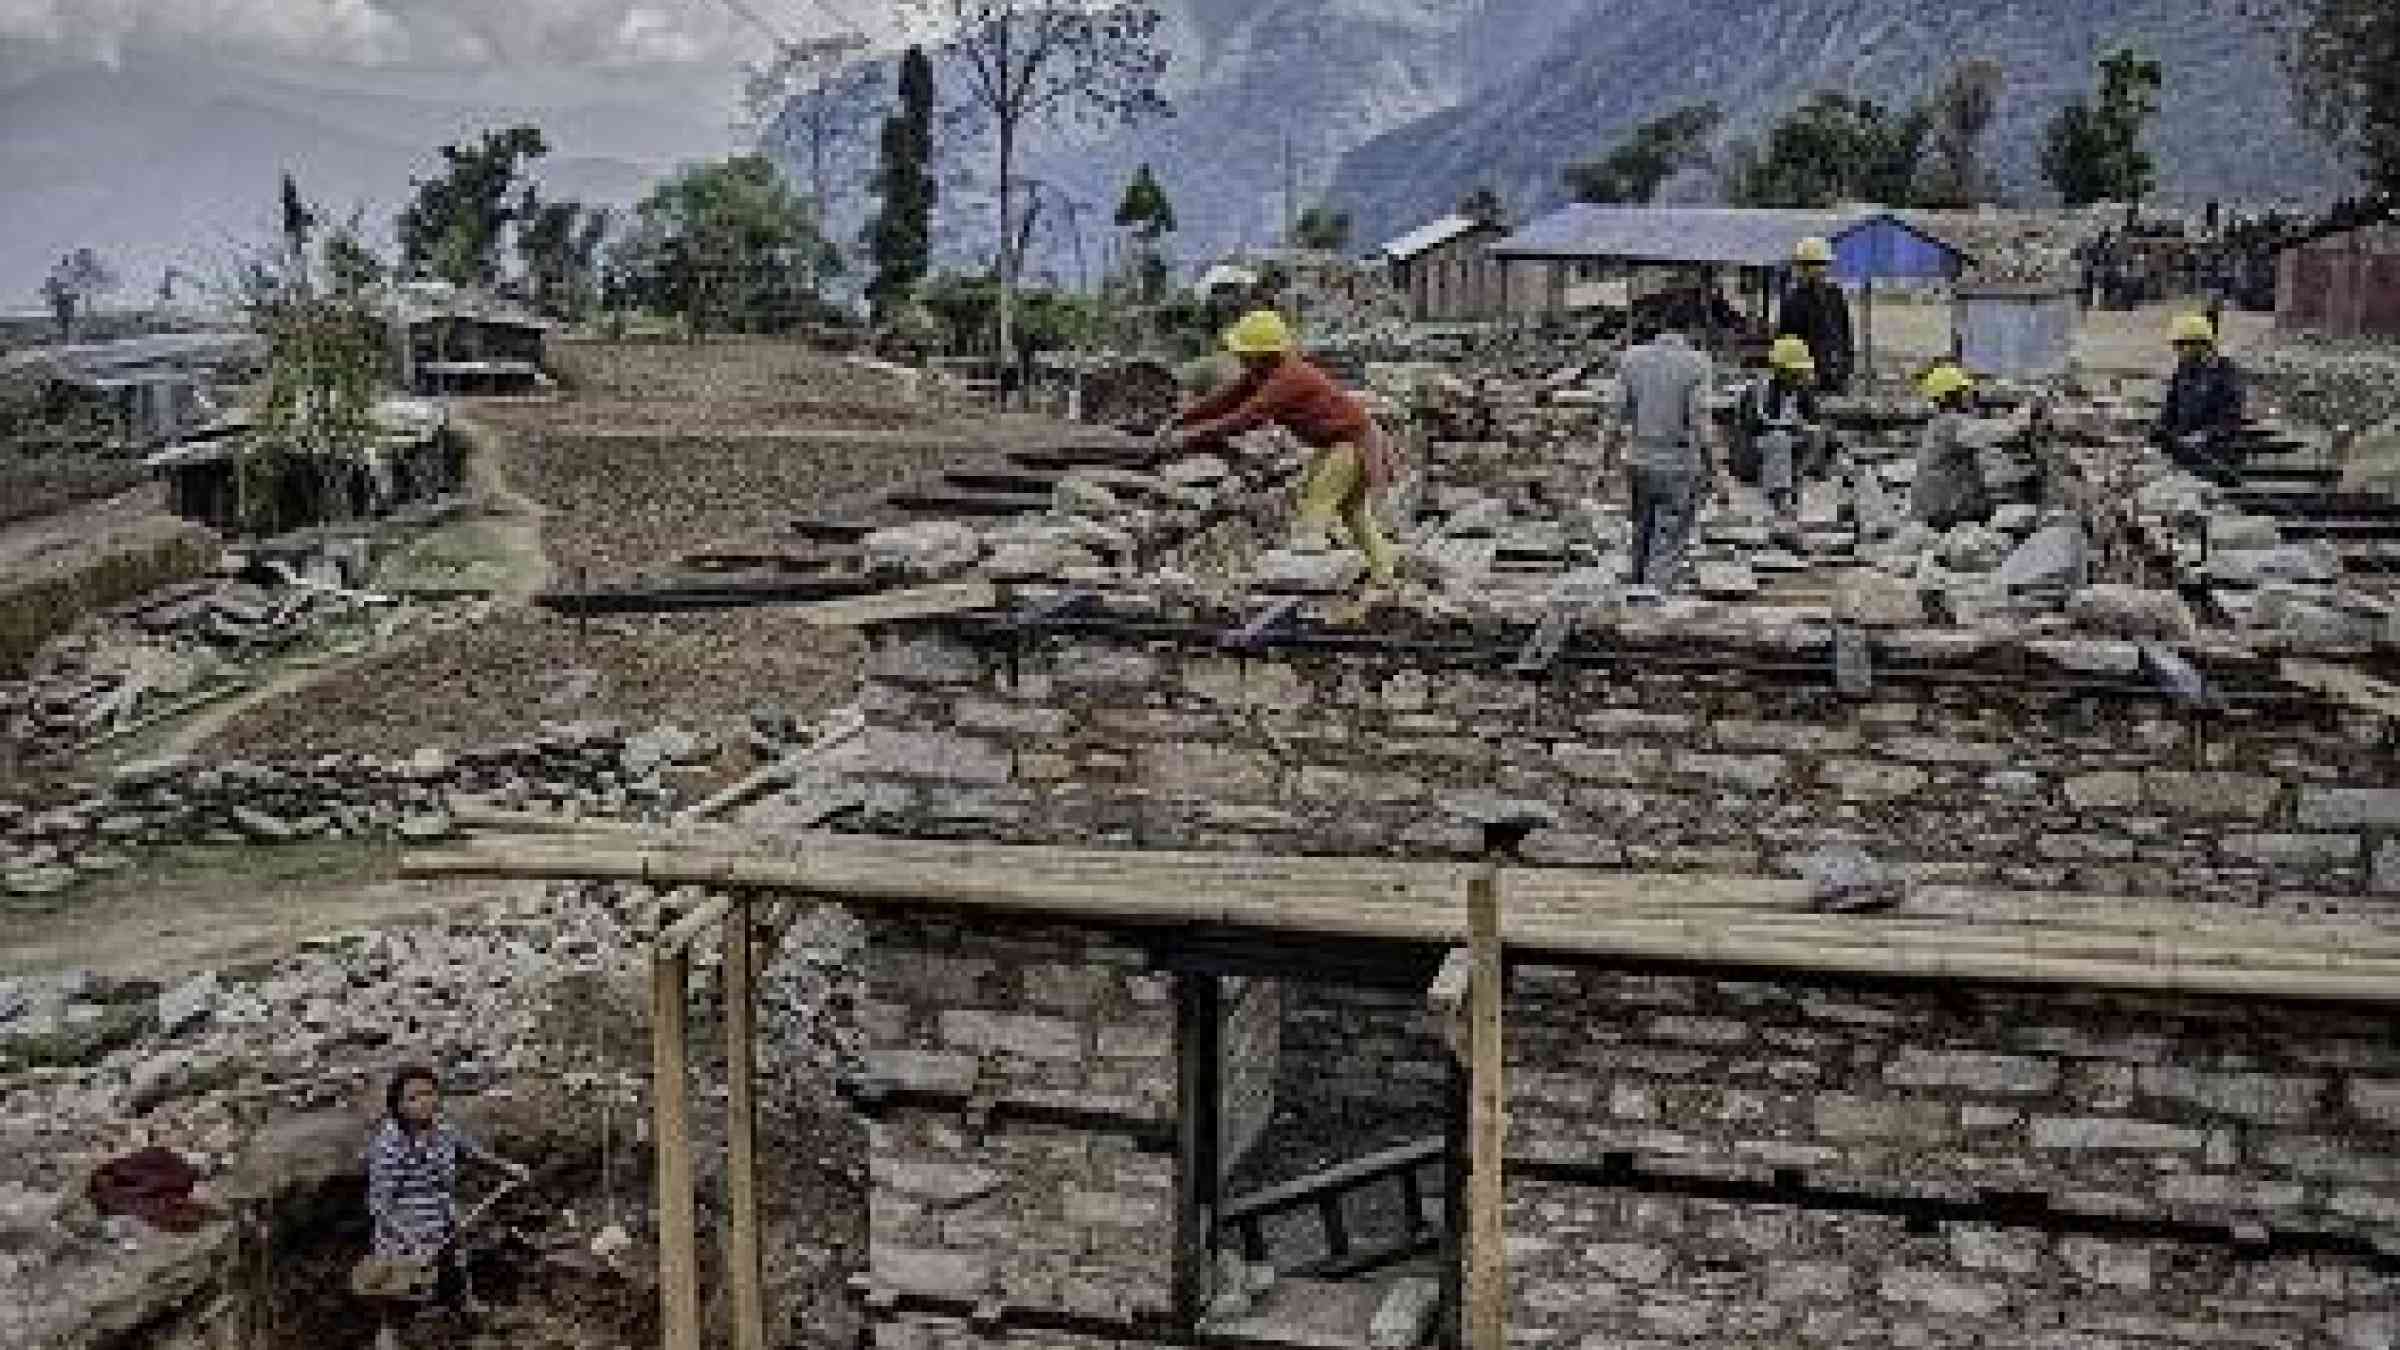 Post-earthquake reconstruction efforts get underway in Nepal (Photo: International Federation of Red Cross and Red Crescent Societies)